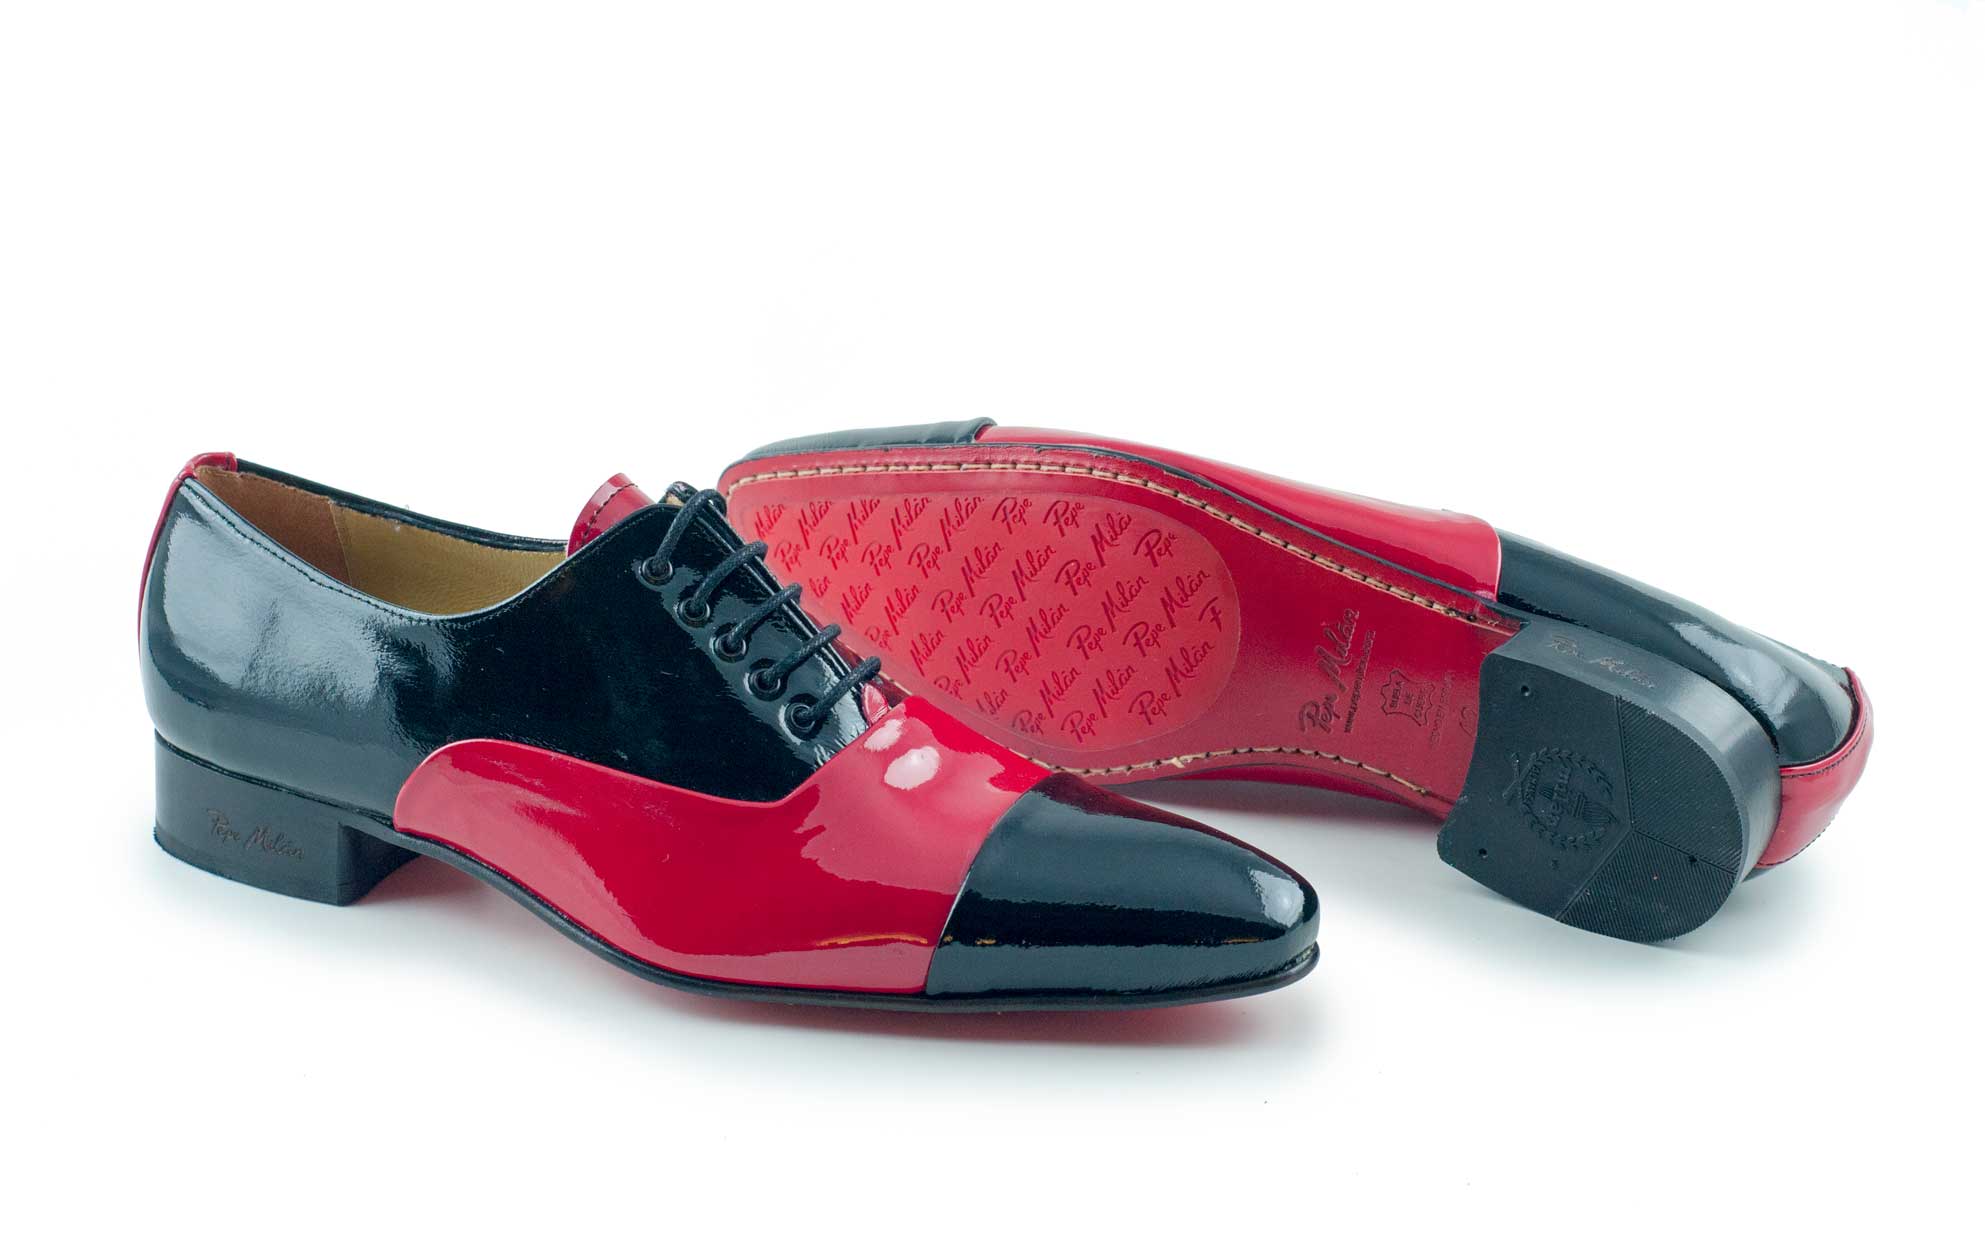 Model Inferno shoe, manufactured in black and red patent leather.